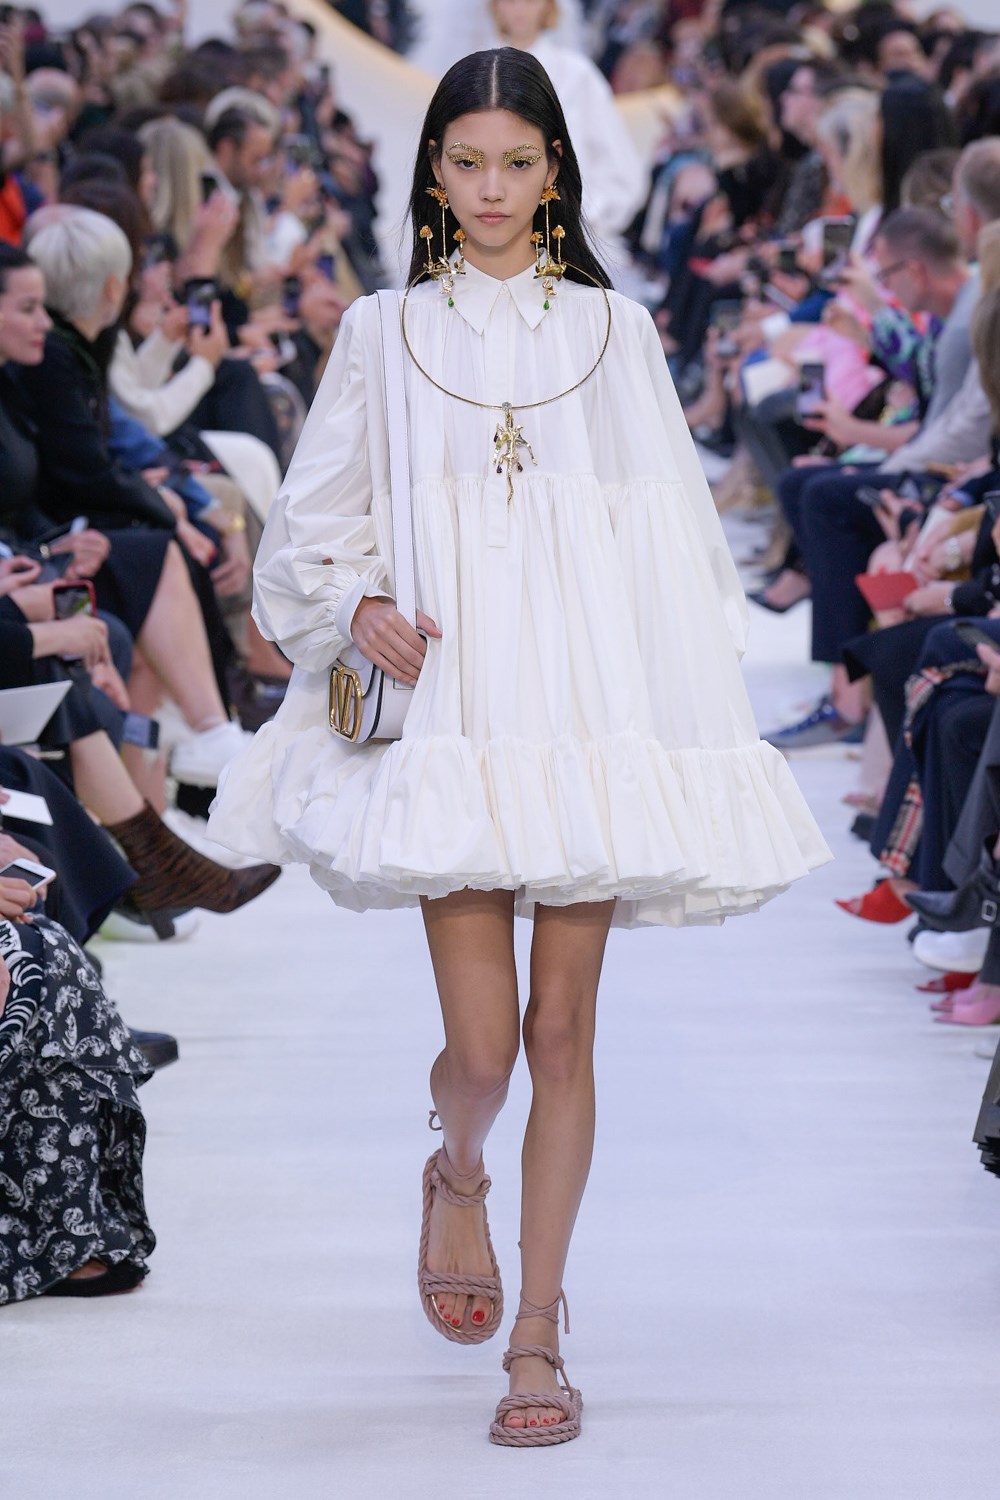 Top 15 Breakout Runway Models of Spring 2020 | The Impression